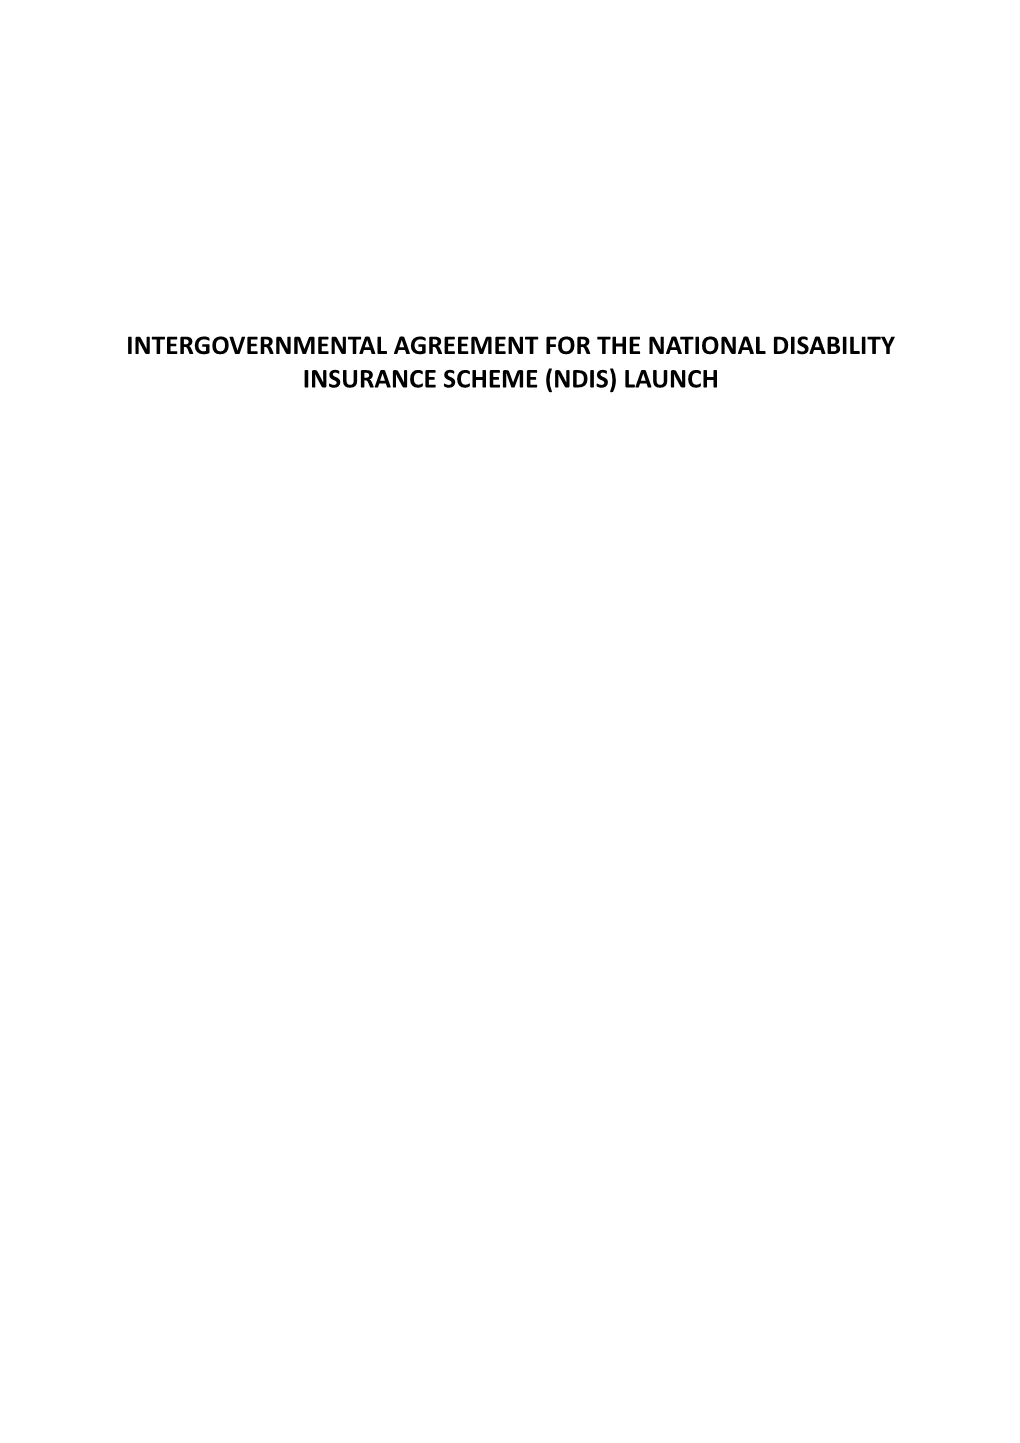 Intergovernmental Agreementfor the National Disability Insurance Scheme (NDIS) Launch